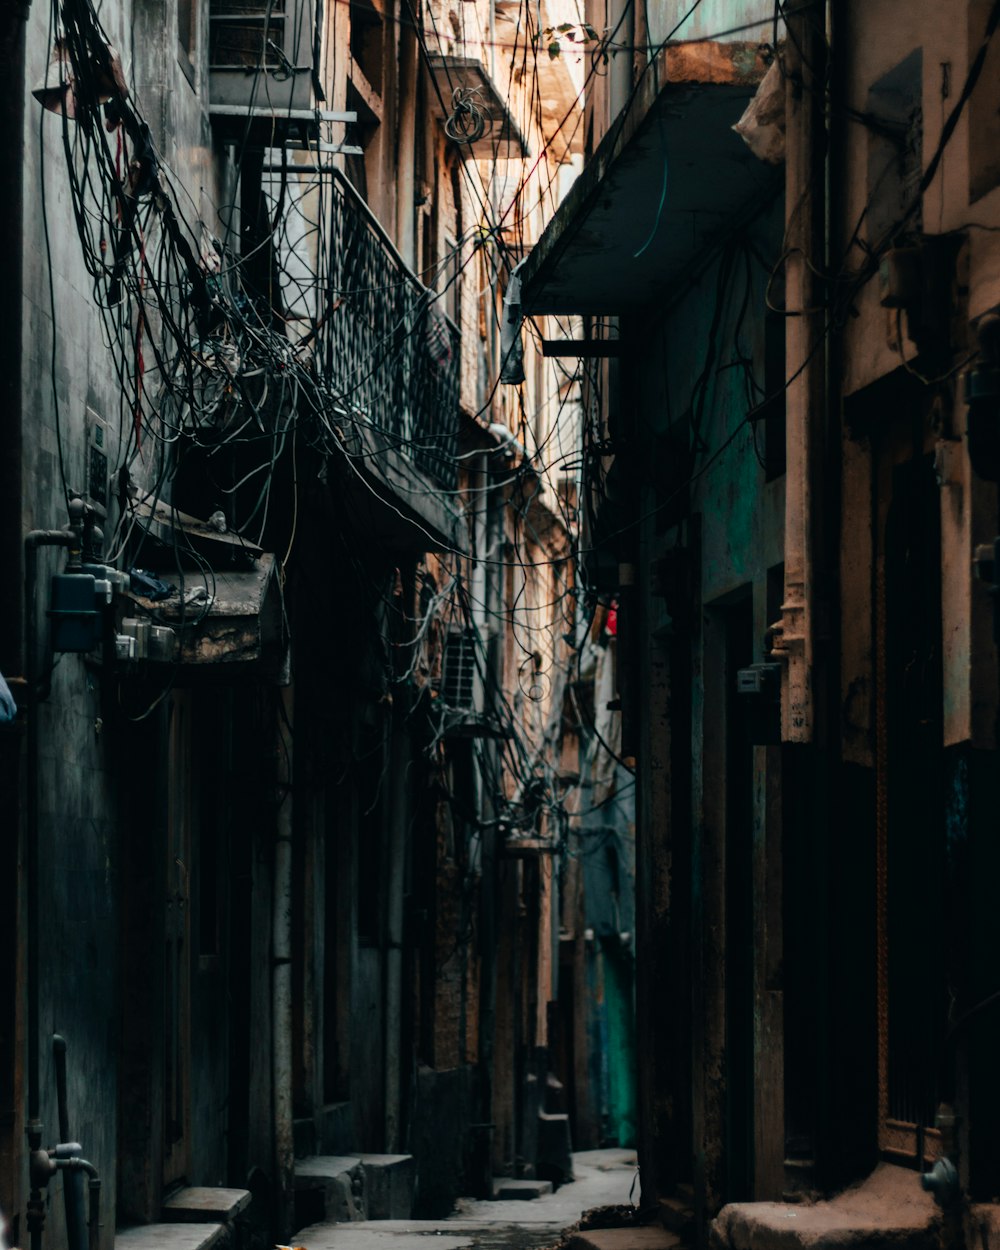 a narrow alleyway in a city with lots of wires